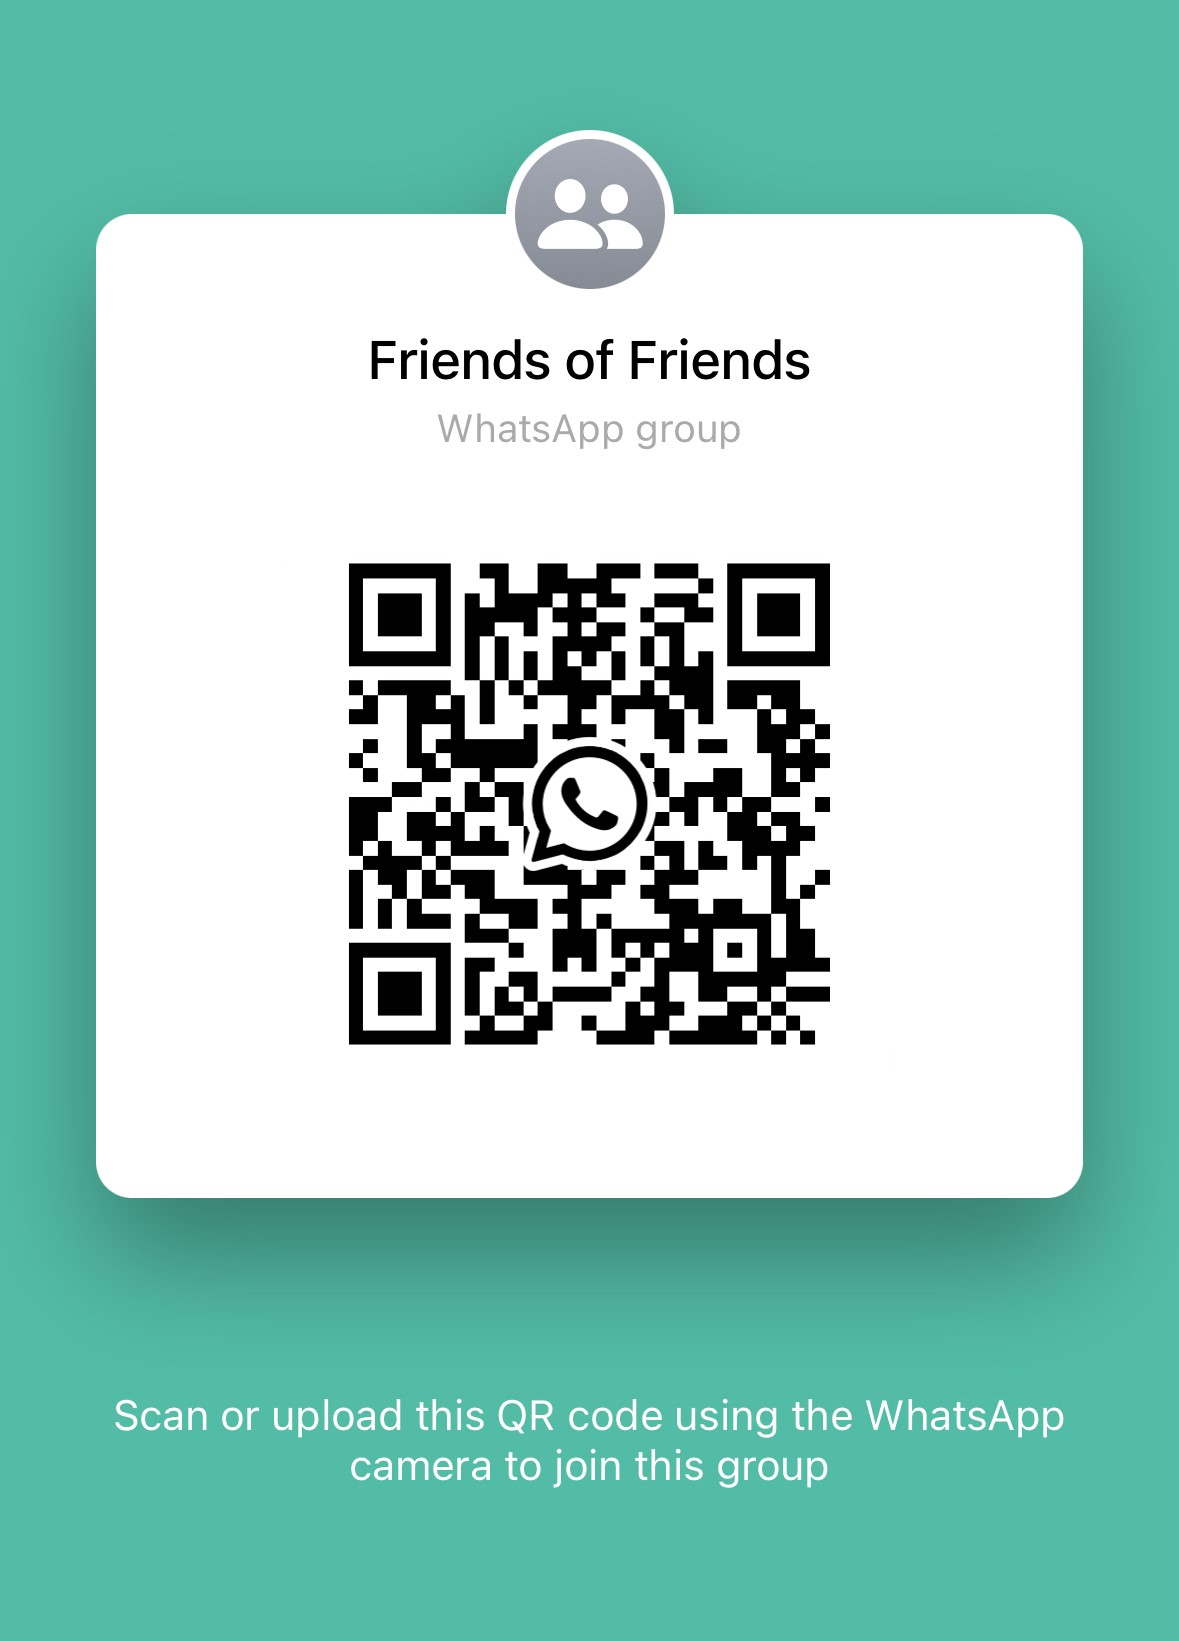 Friends of Friends Group